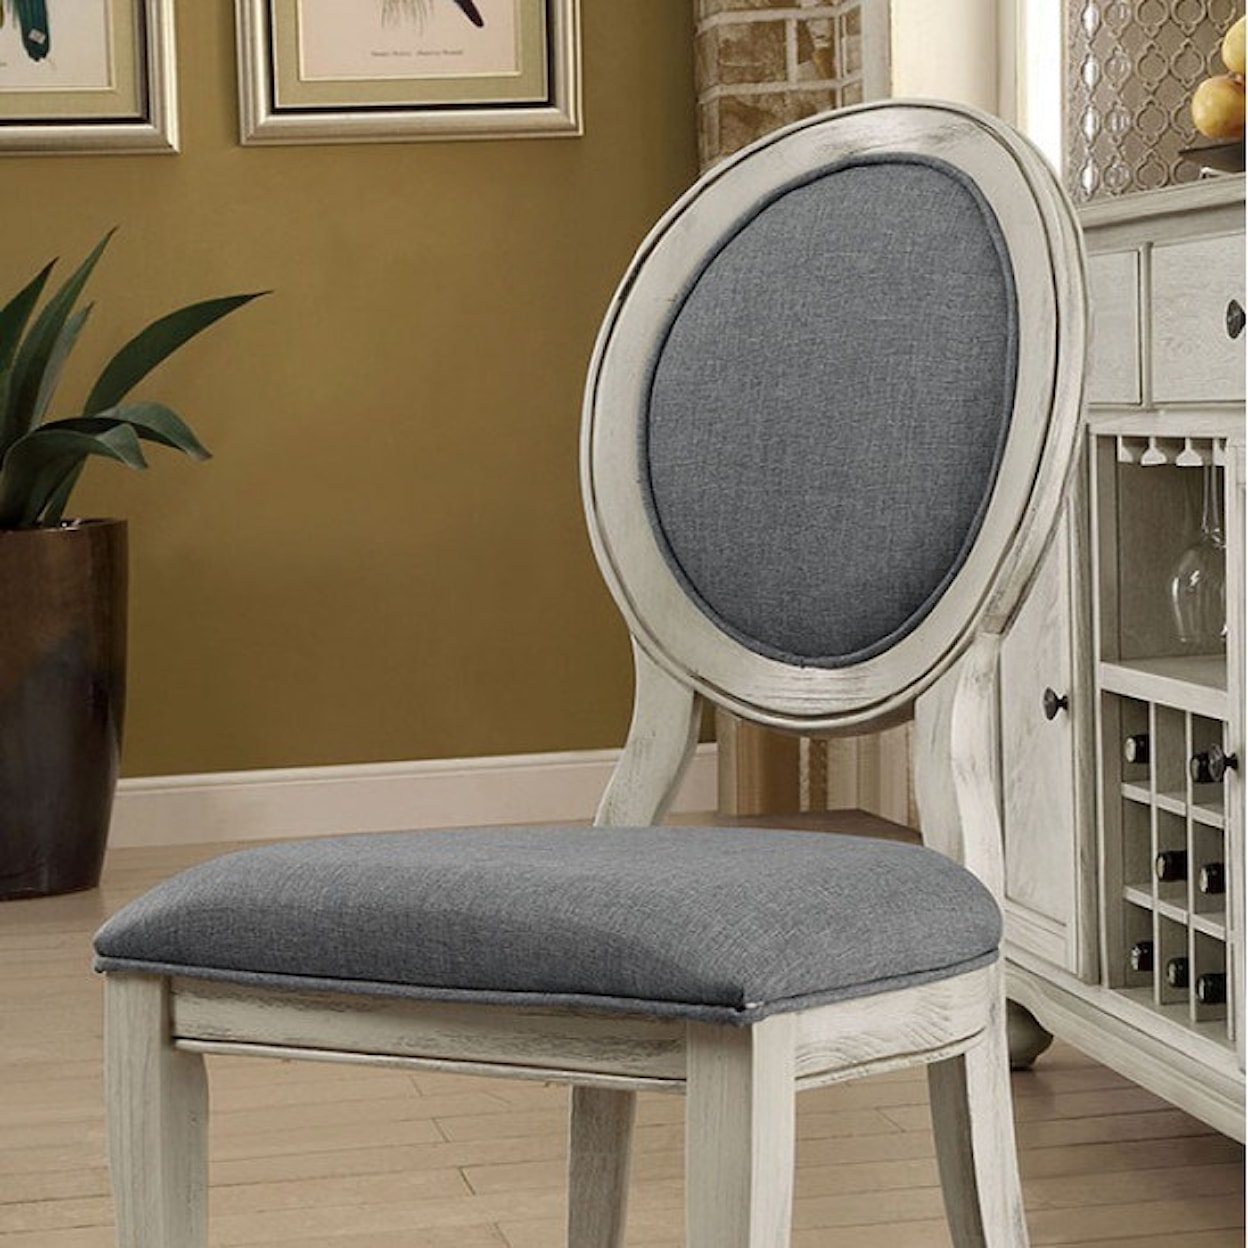 Furniture of America Kathryn Side Chair, 2 Pack